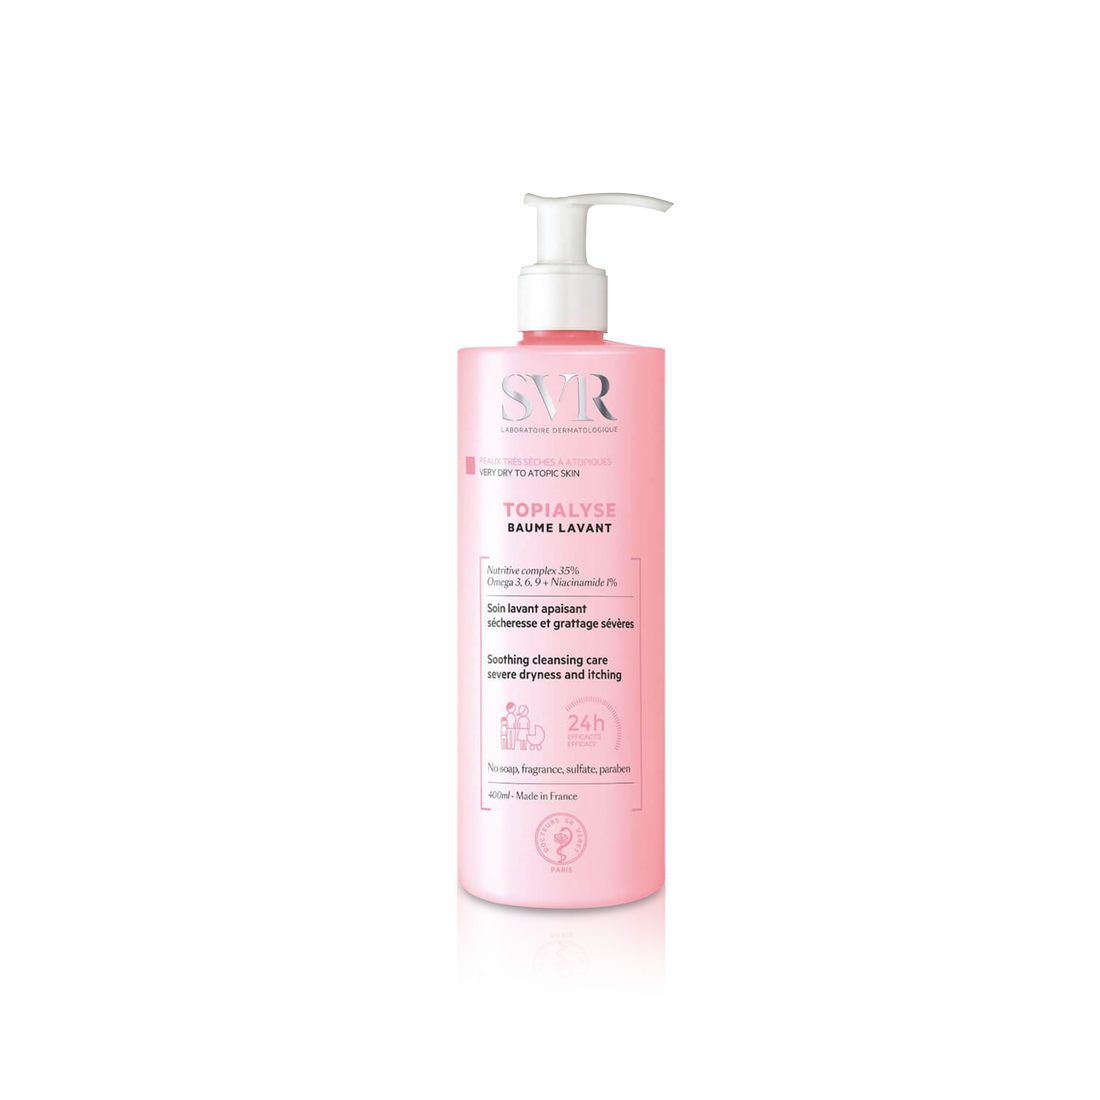 Topialyse Baume Lavant Soothing Cleansing Care